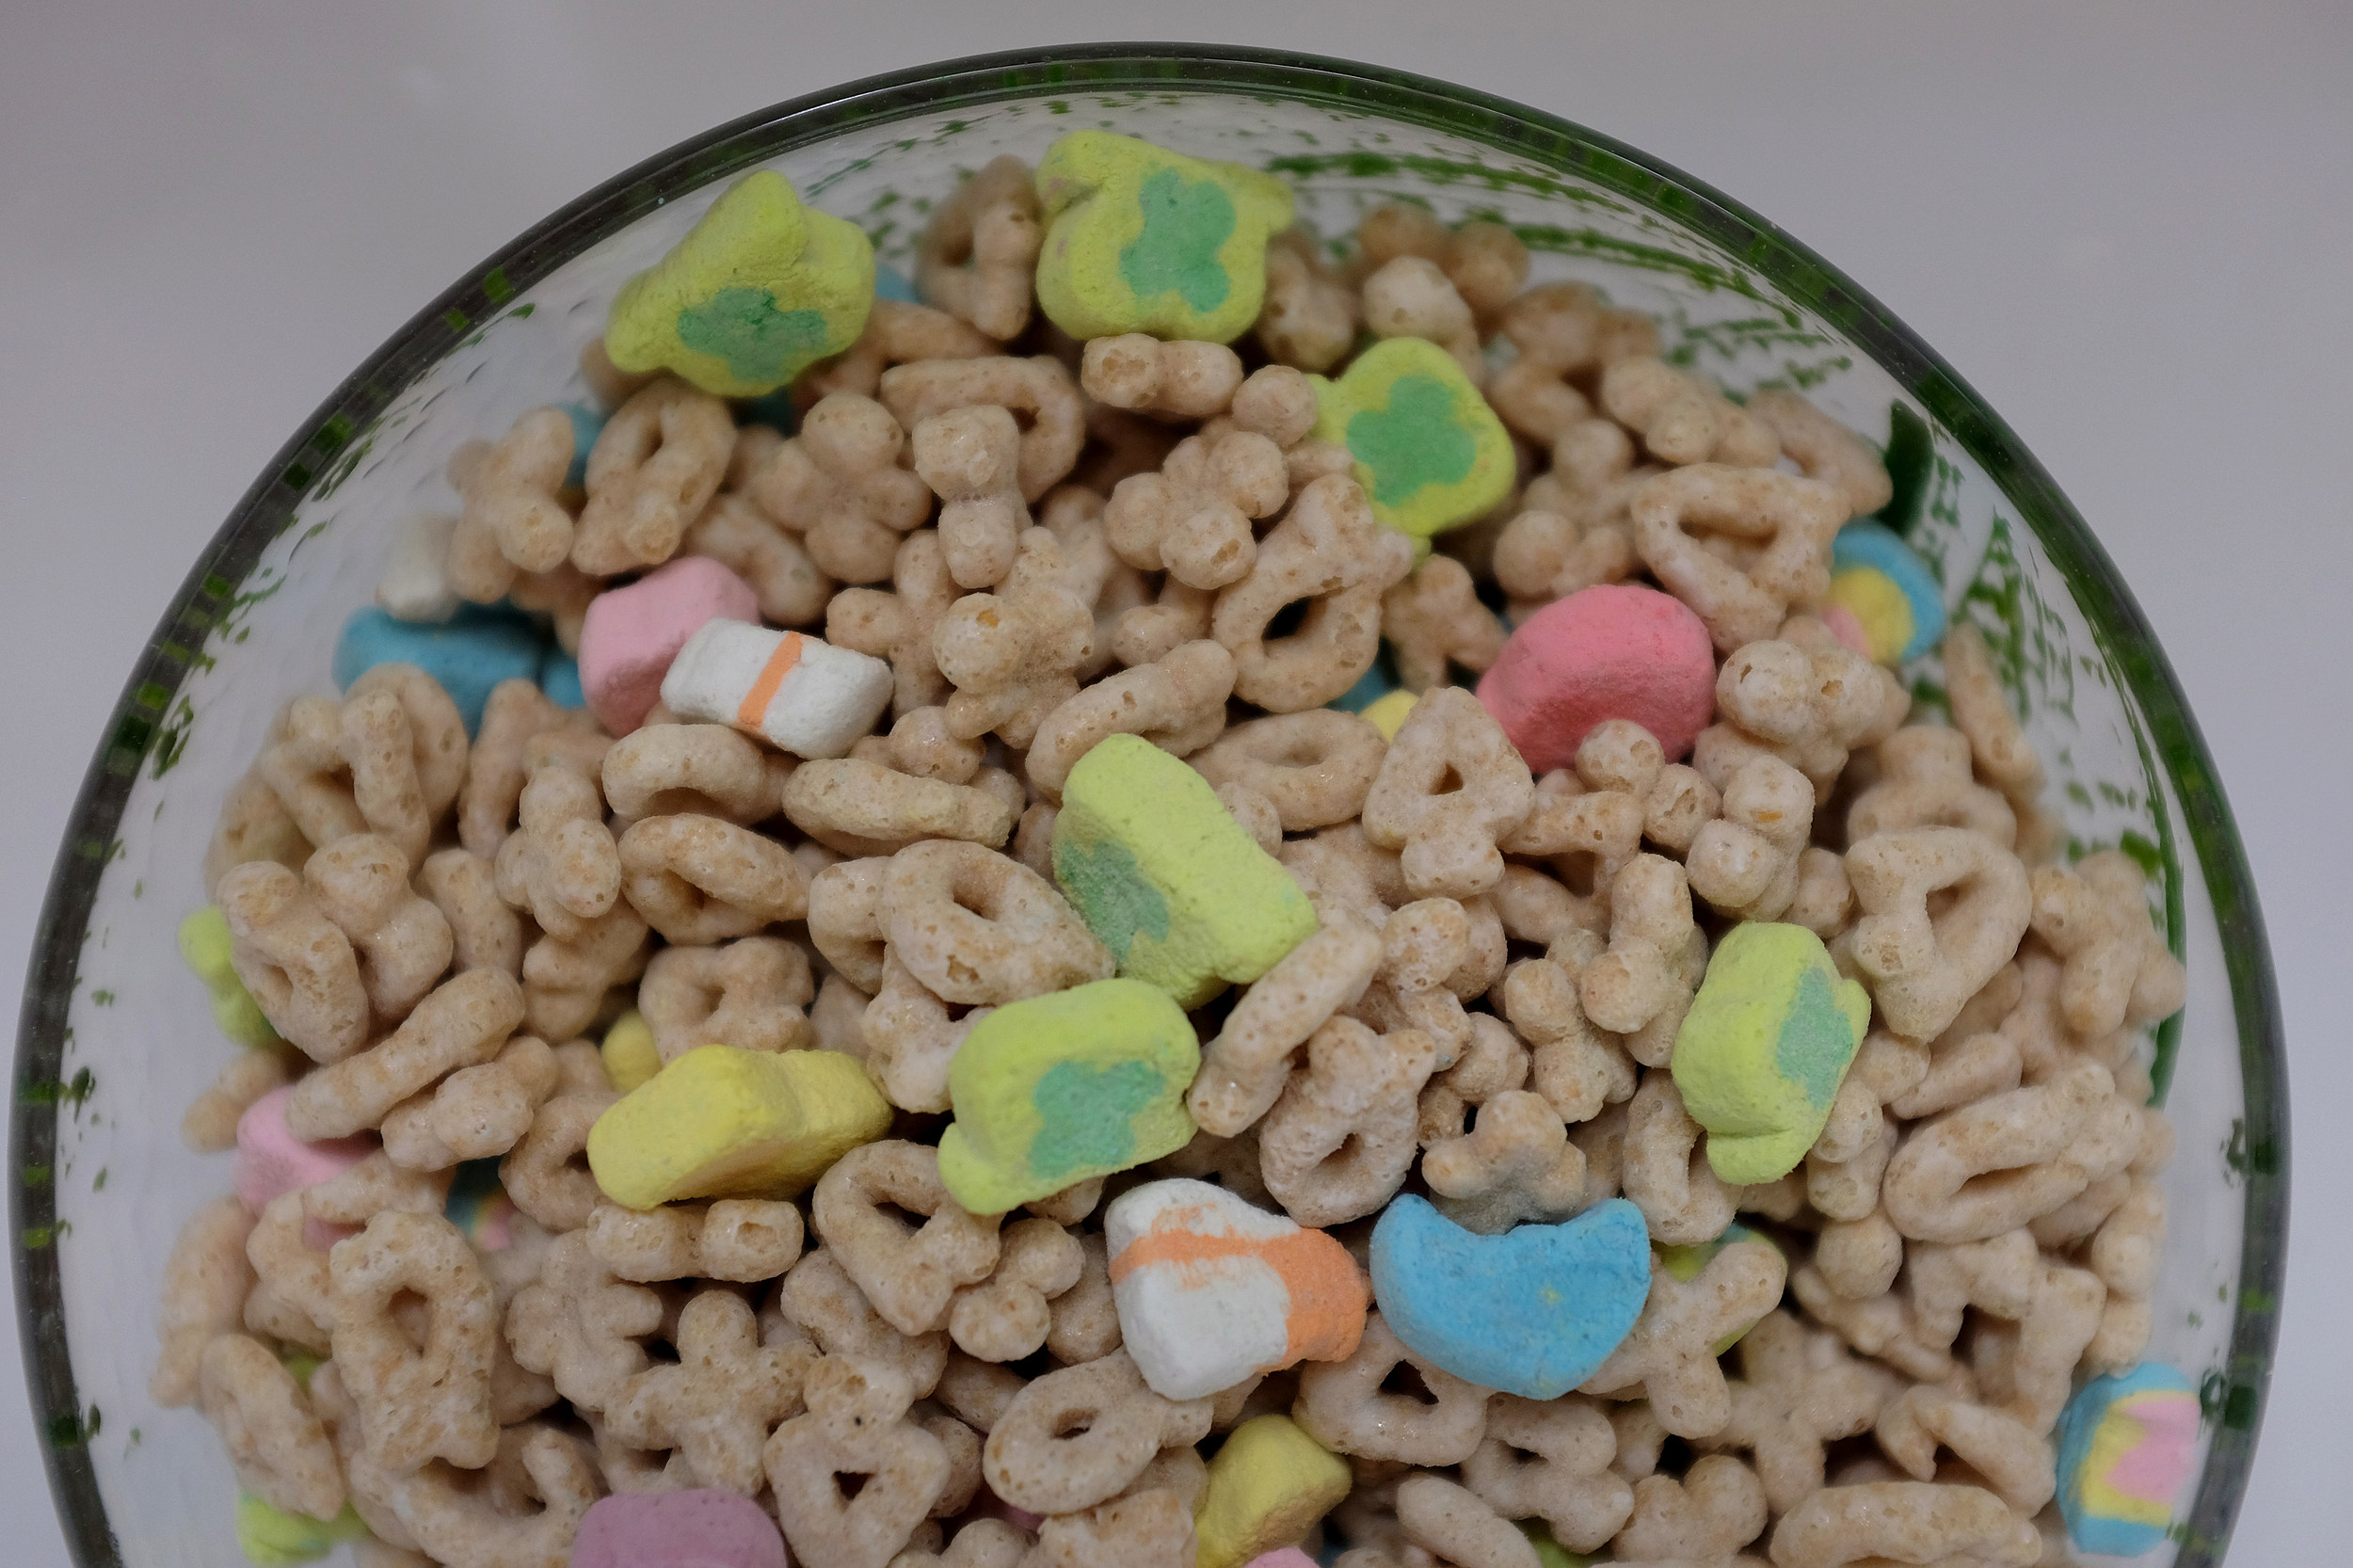 Lucky Charms Marshmallow-Only Boxes Are In Stores - Here's How To Get One